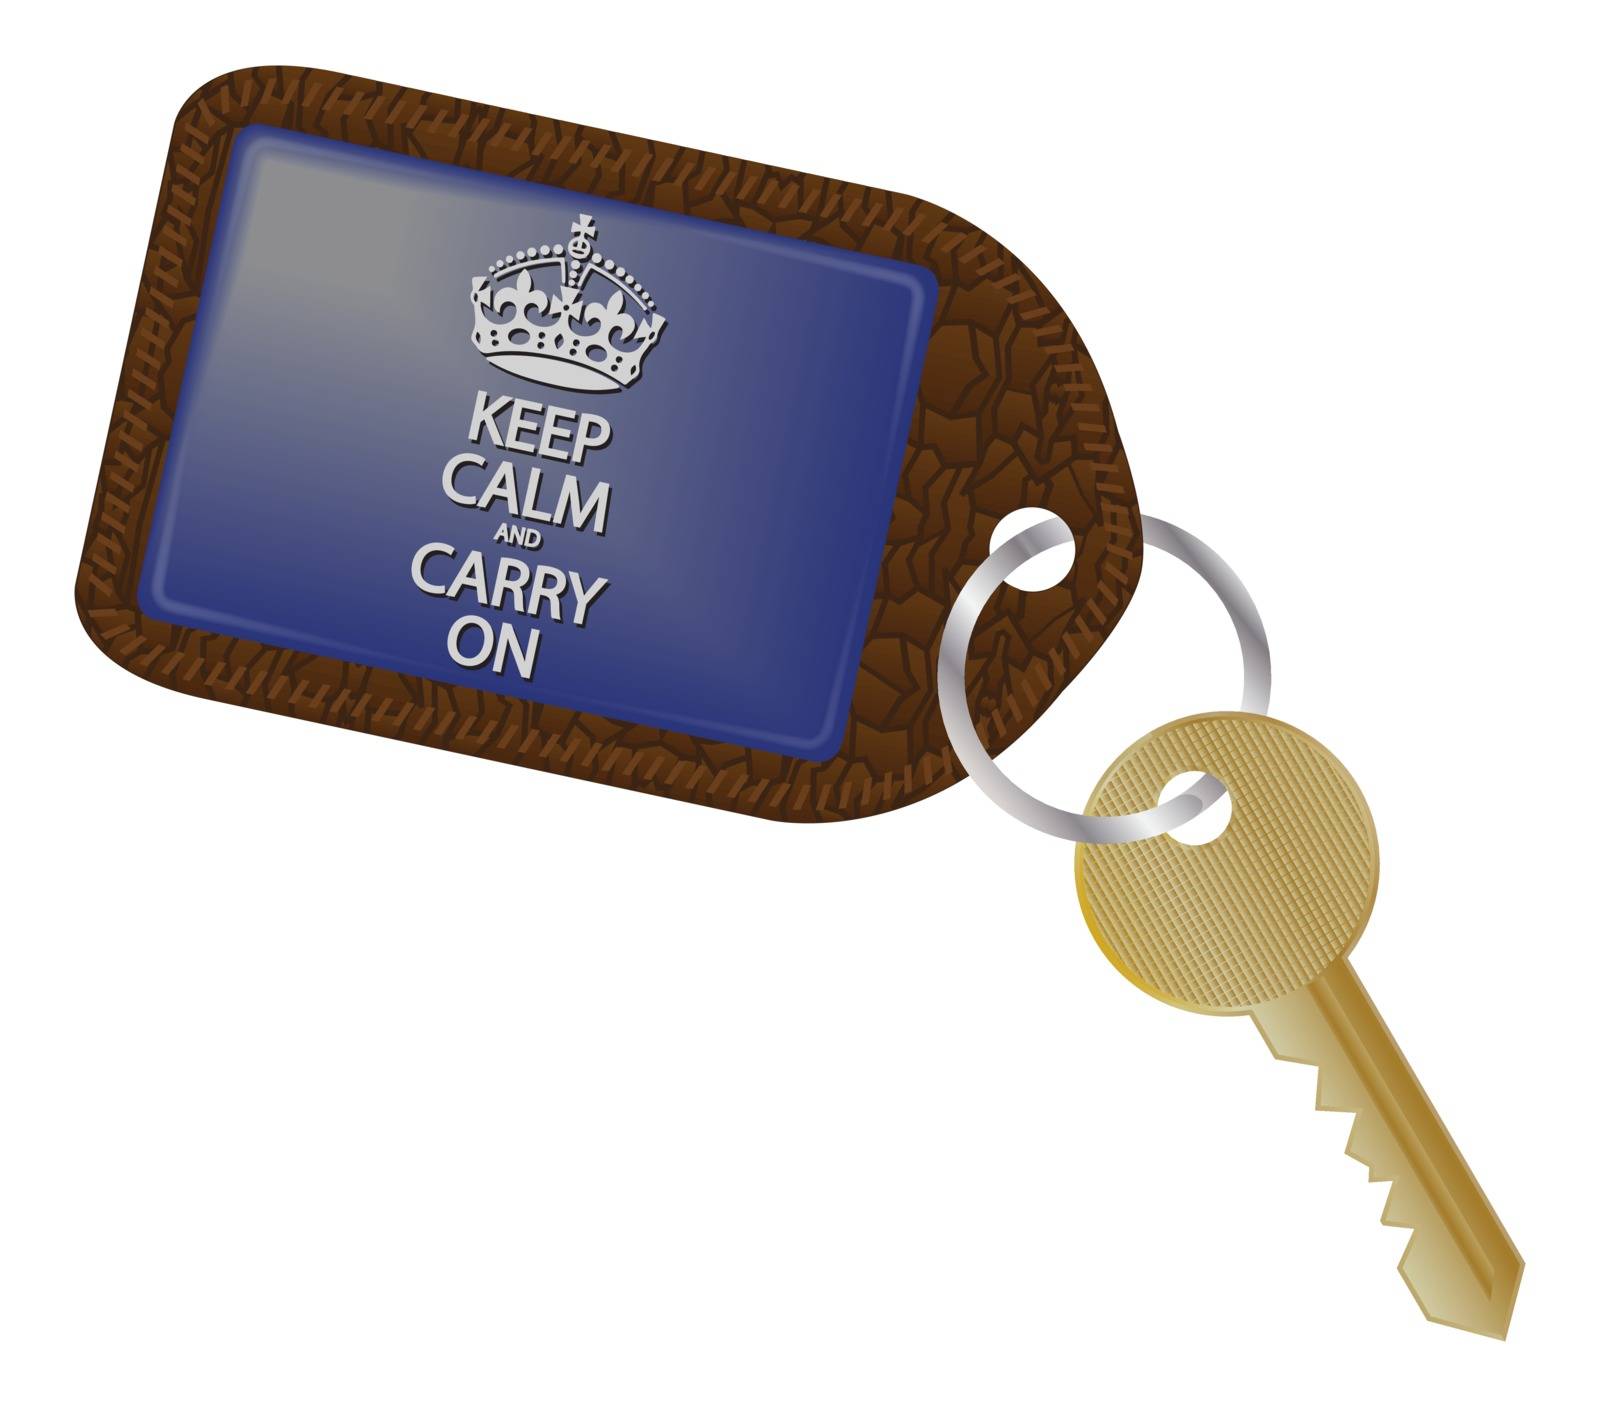 A keep calm and carry on keyring and key isolated on a whtie background